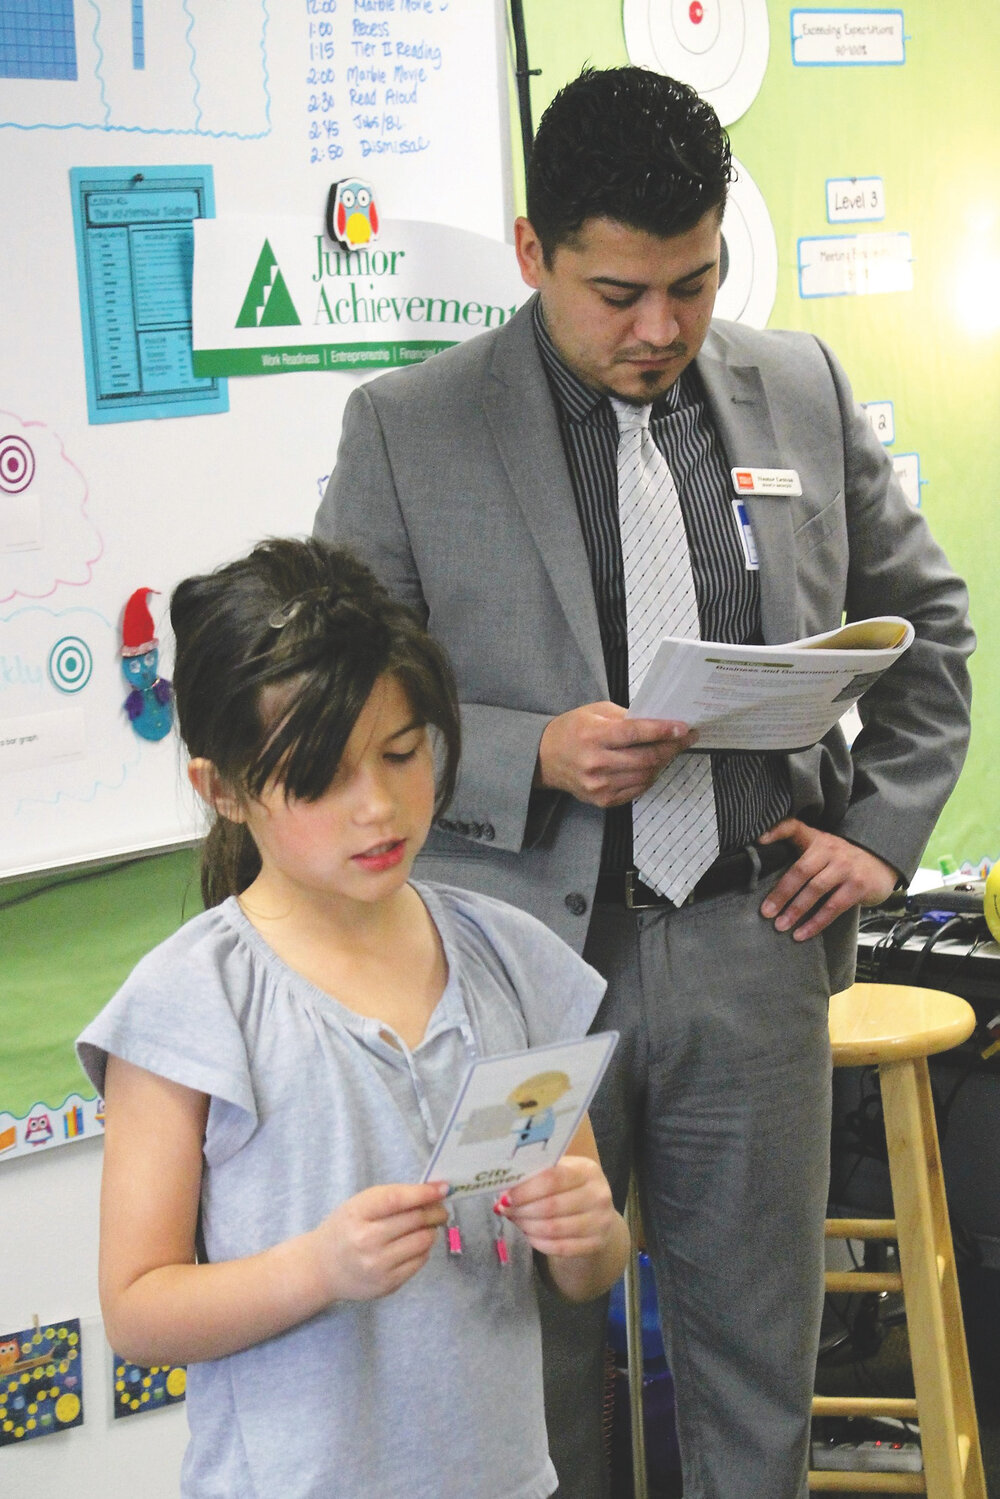 Brewster second grade student, Natalee Vandelac, reads a job description during the Teach Children to Save Day program presented by the Brewster branch of Wells Fargo Bank. Standing behind Vandelac is Wells Fargo branch manager, Nestor Lemus.